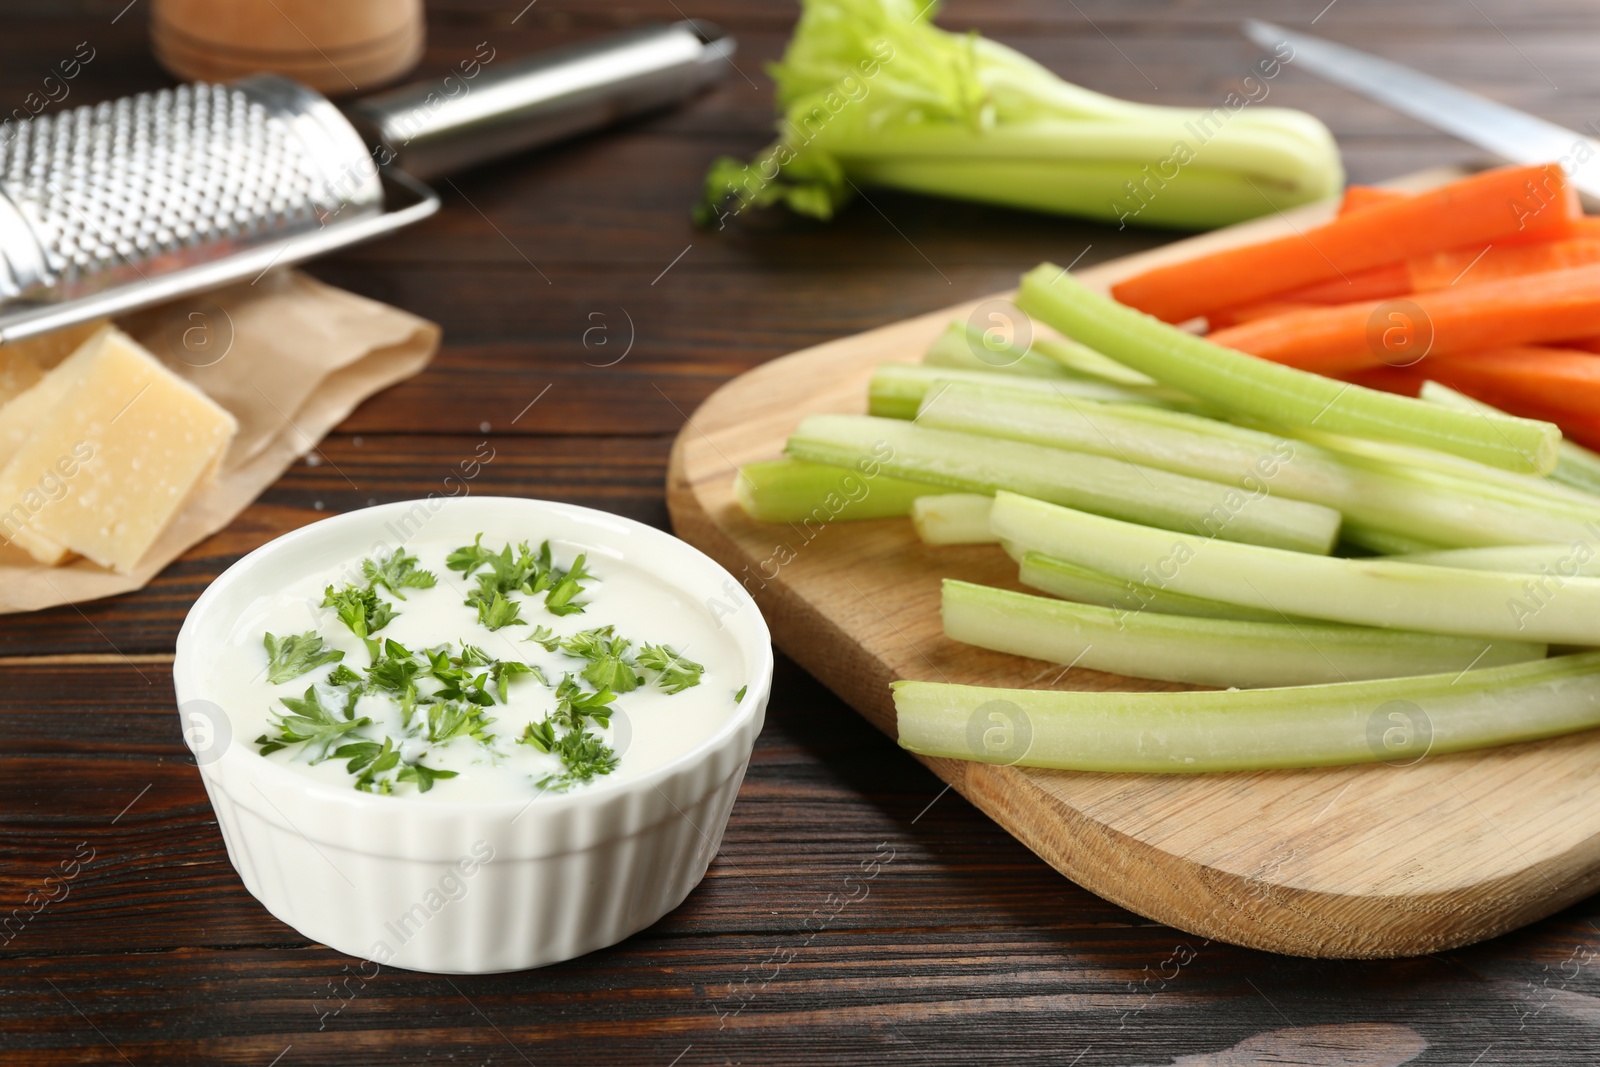 Photo of Celery and carrot sticks with dip sauce on wooden table, closeup